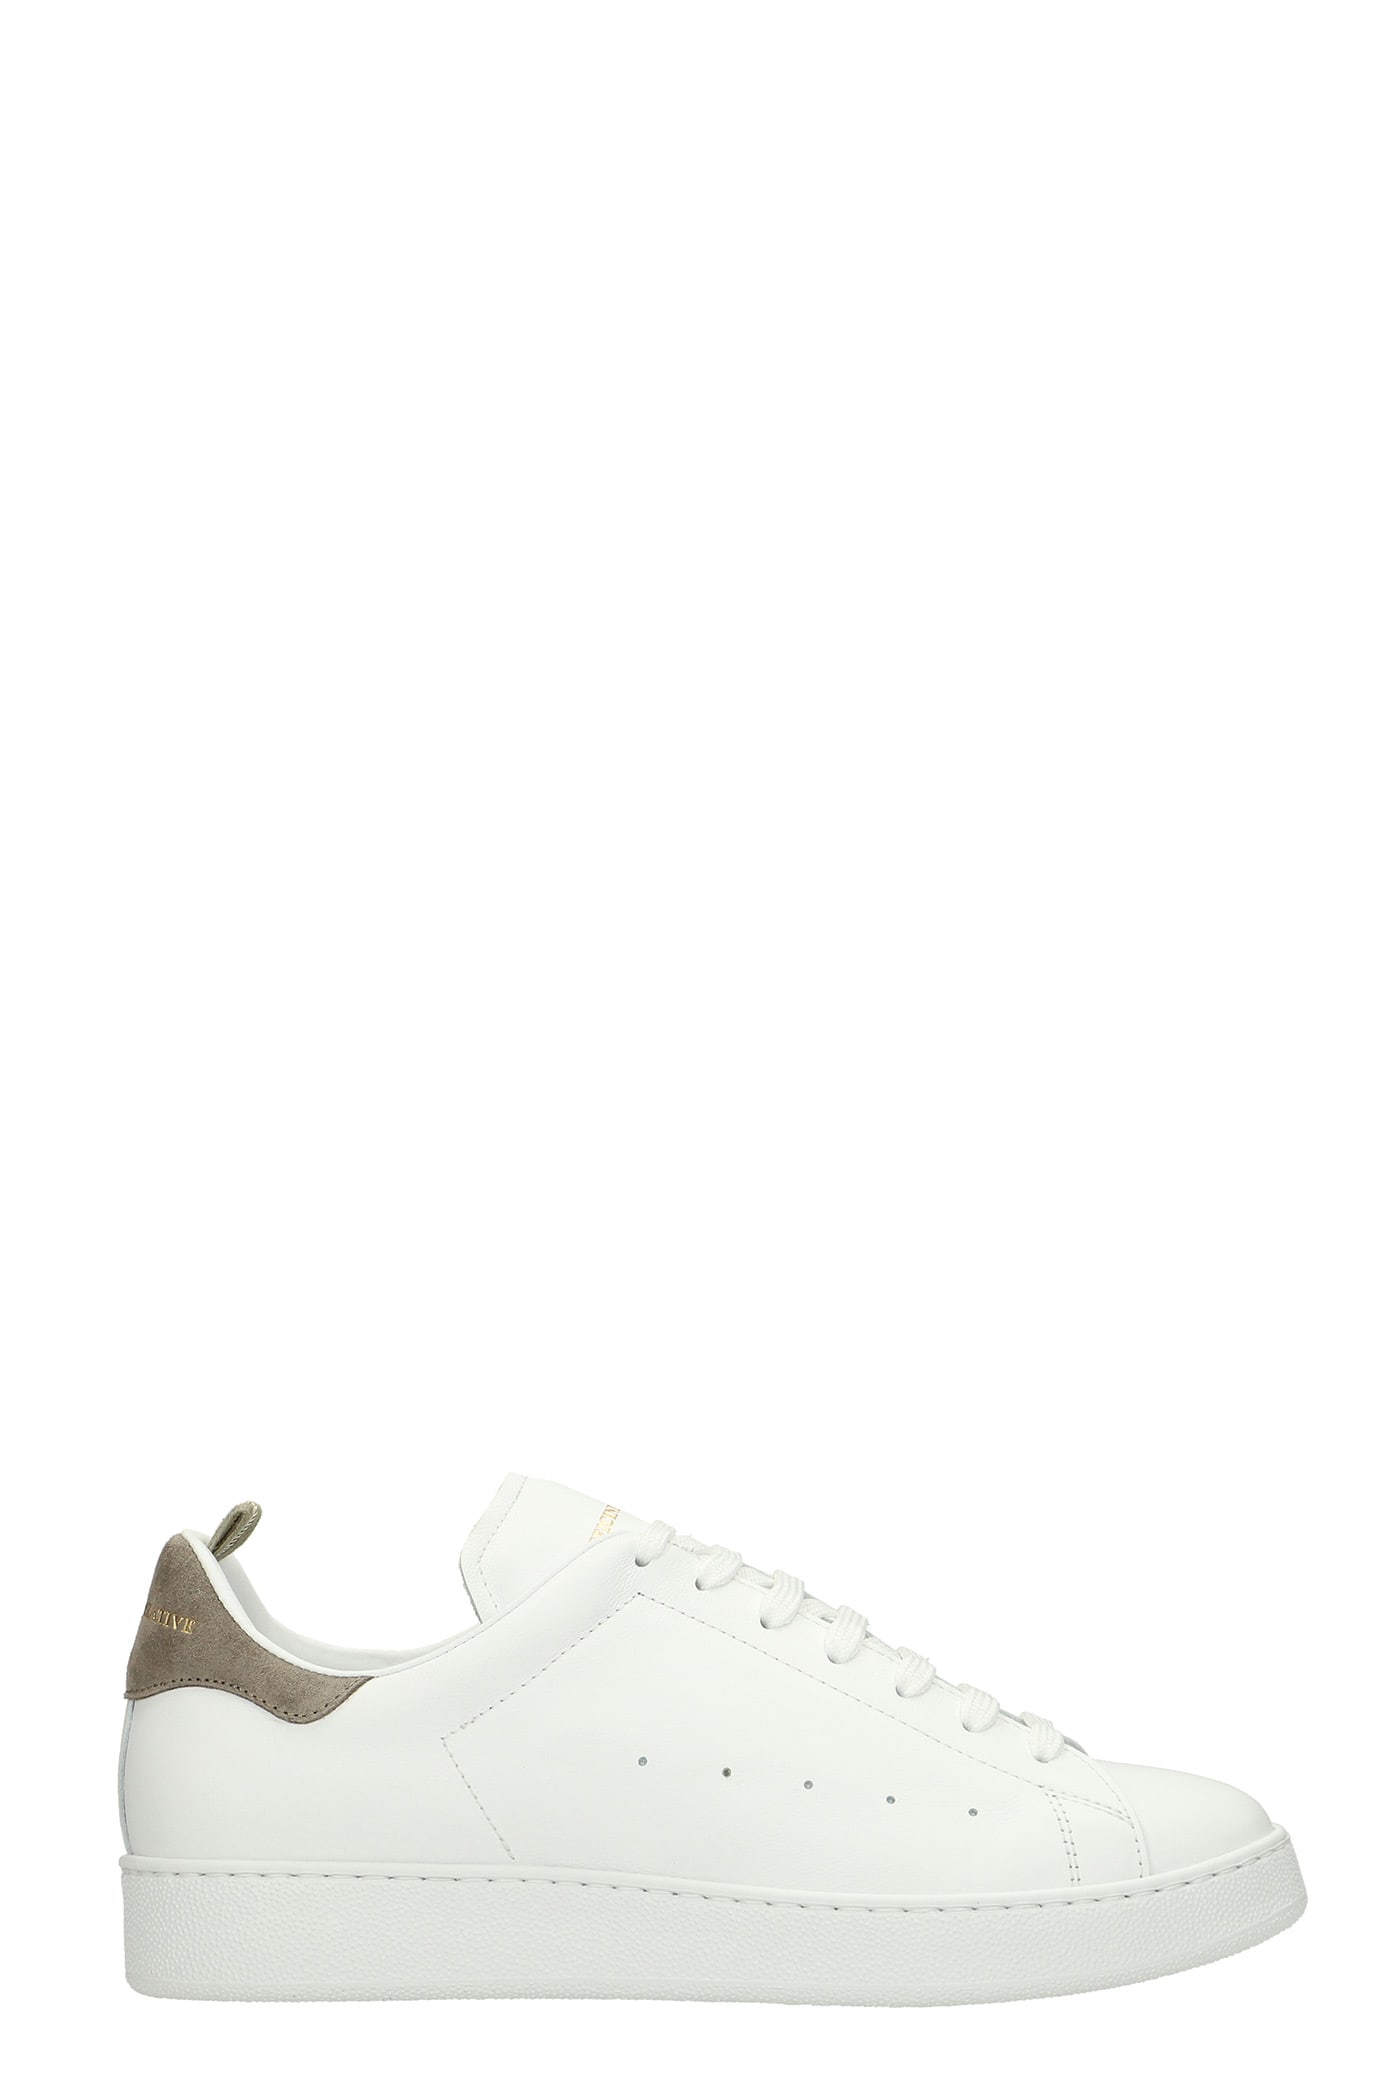 Officine Creative Lace Up Shoes In White Leather